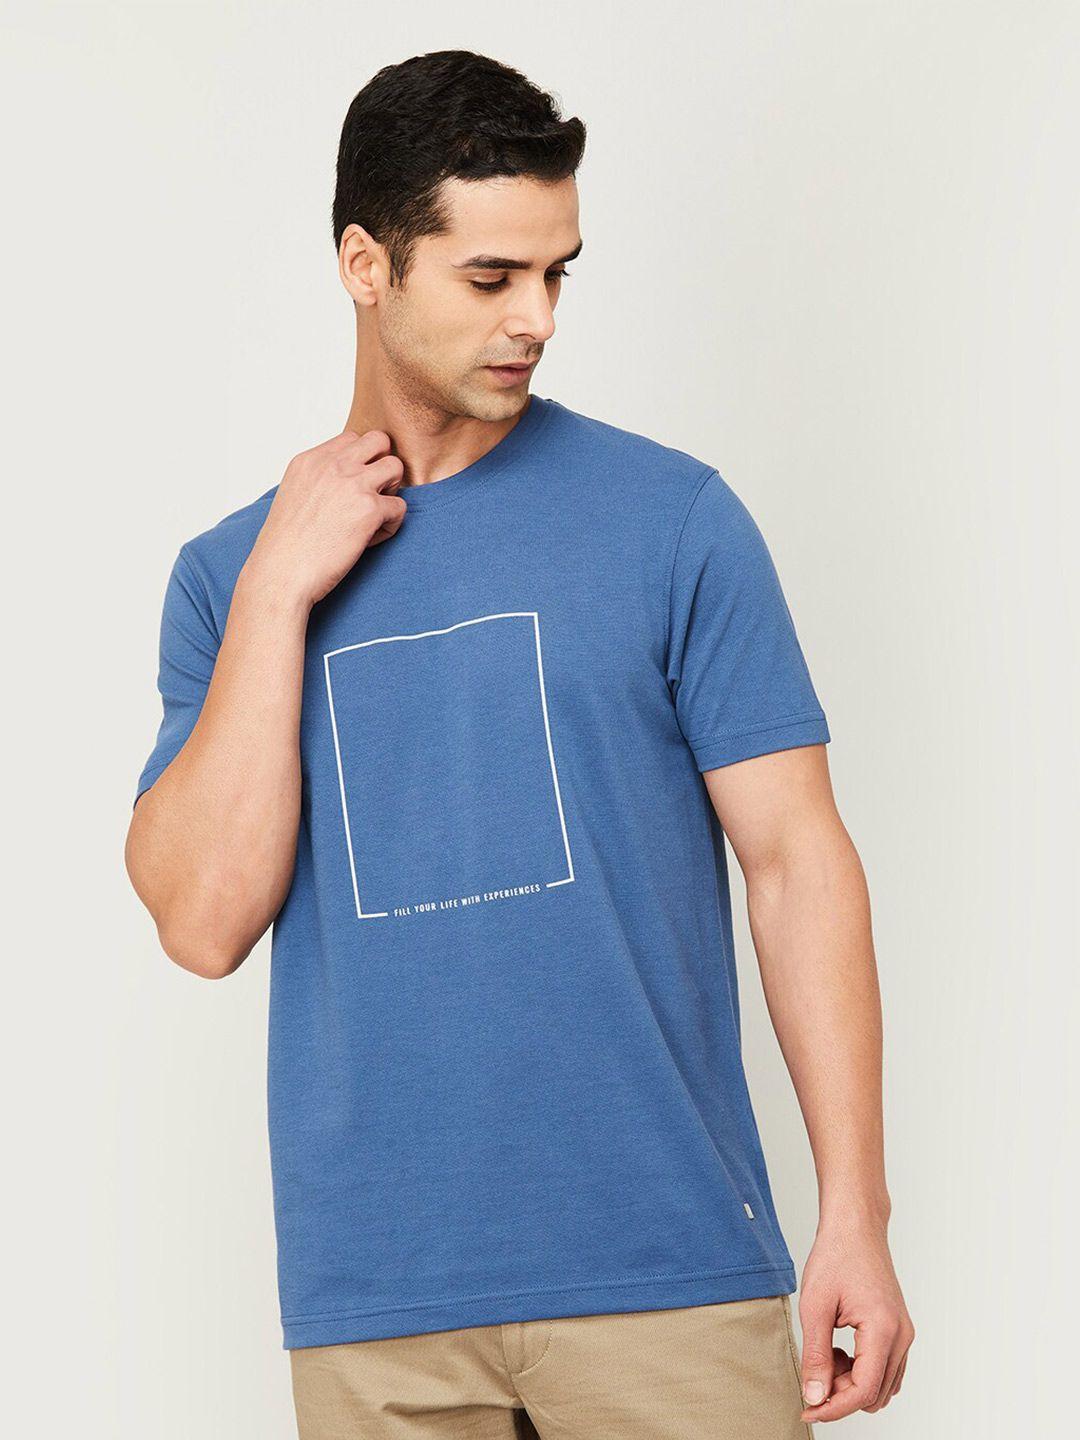 code by lifestyle round neck t-shirt